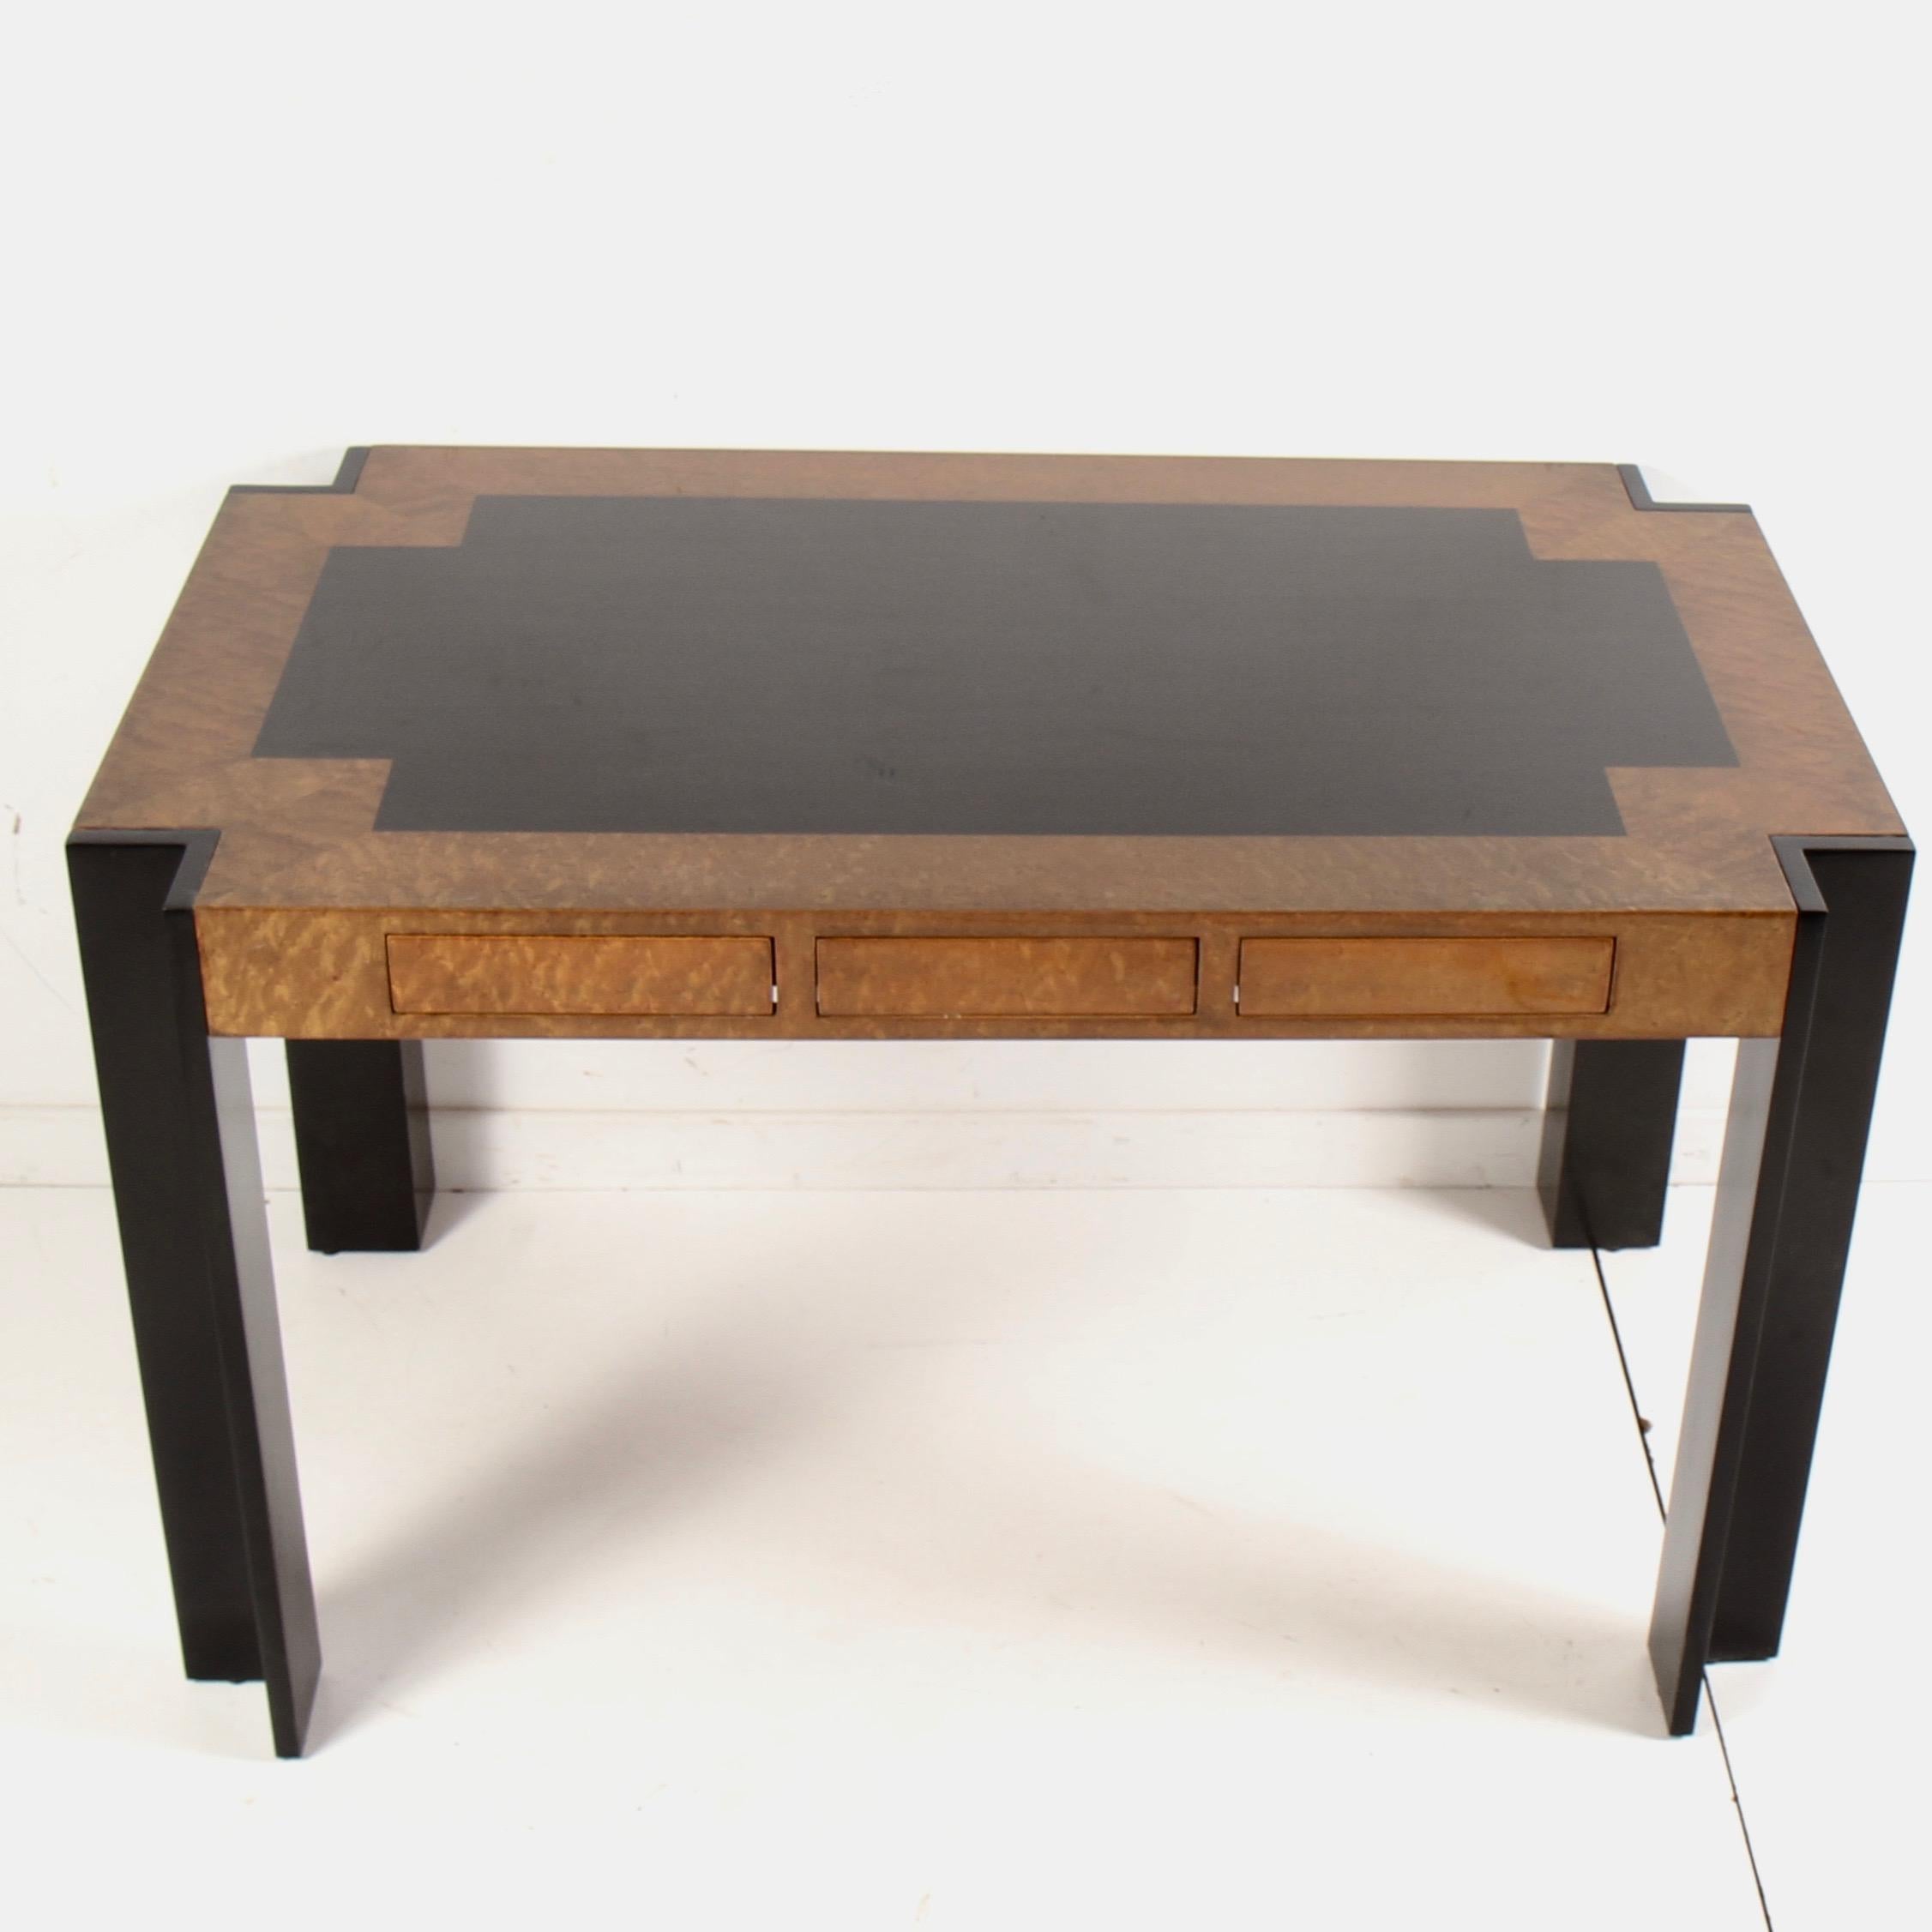 Leon Rosen designed desk for The Pace Collection with contrasting ebony and burl veneers. Three center drawers are spring loaded and open with just a touch. Just refinished.